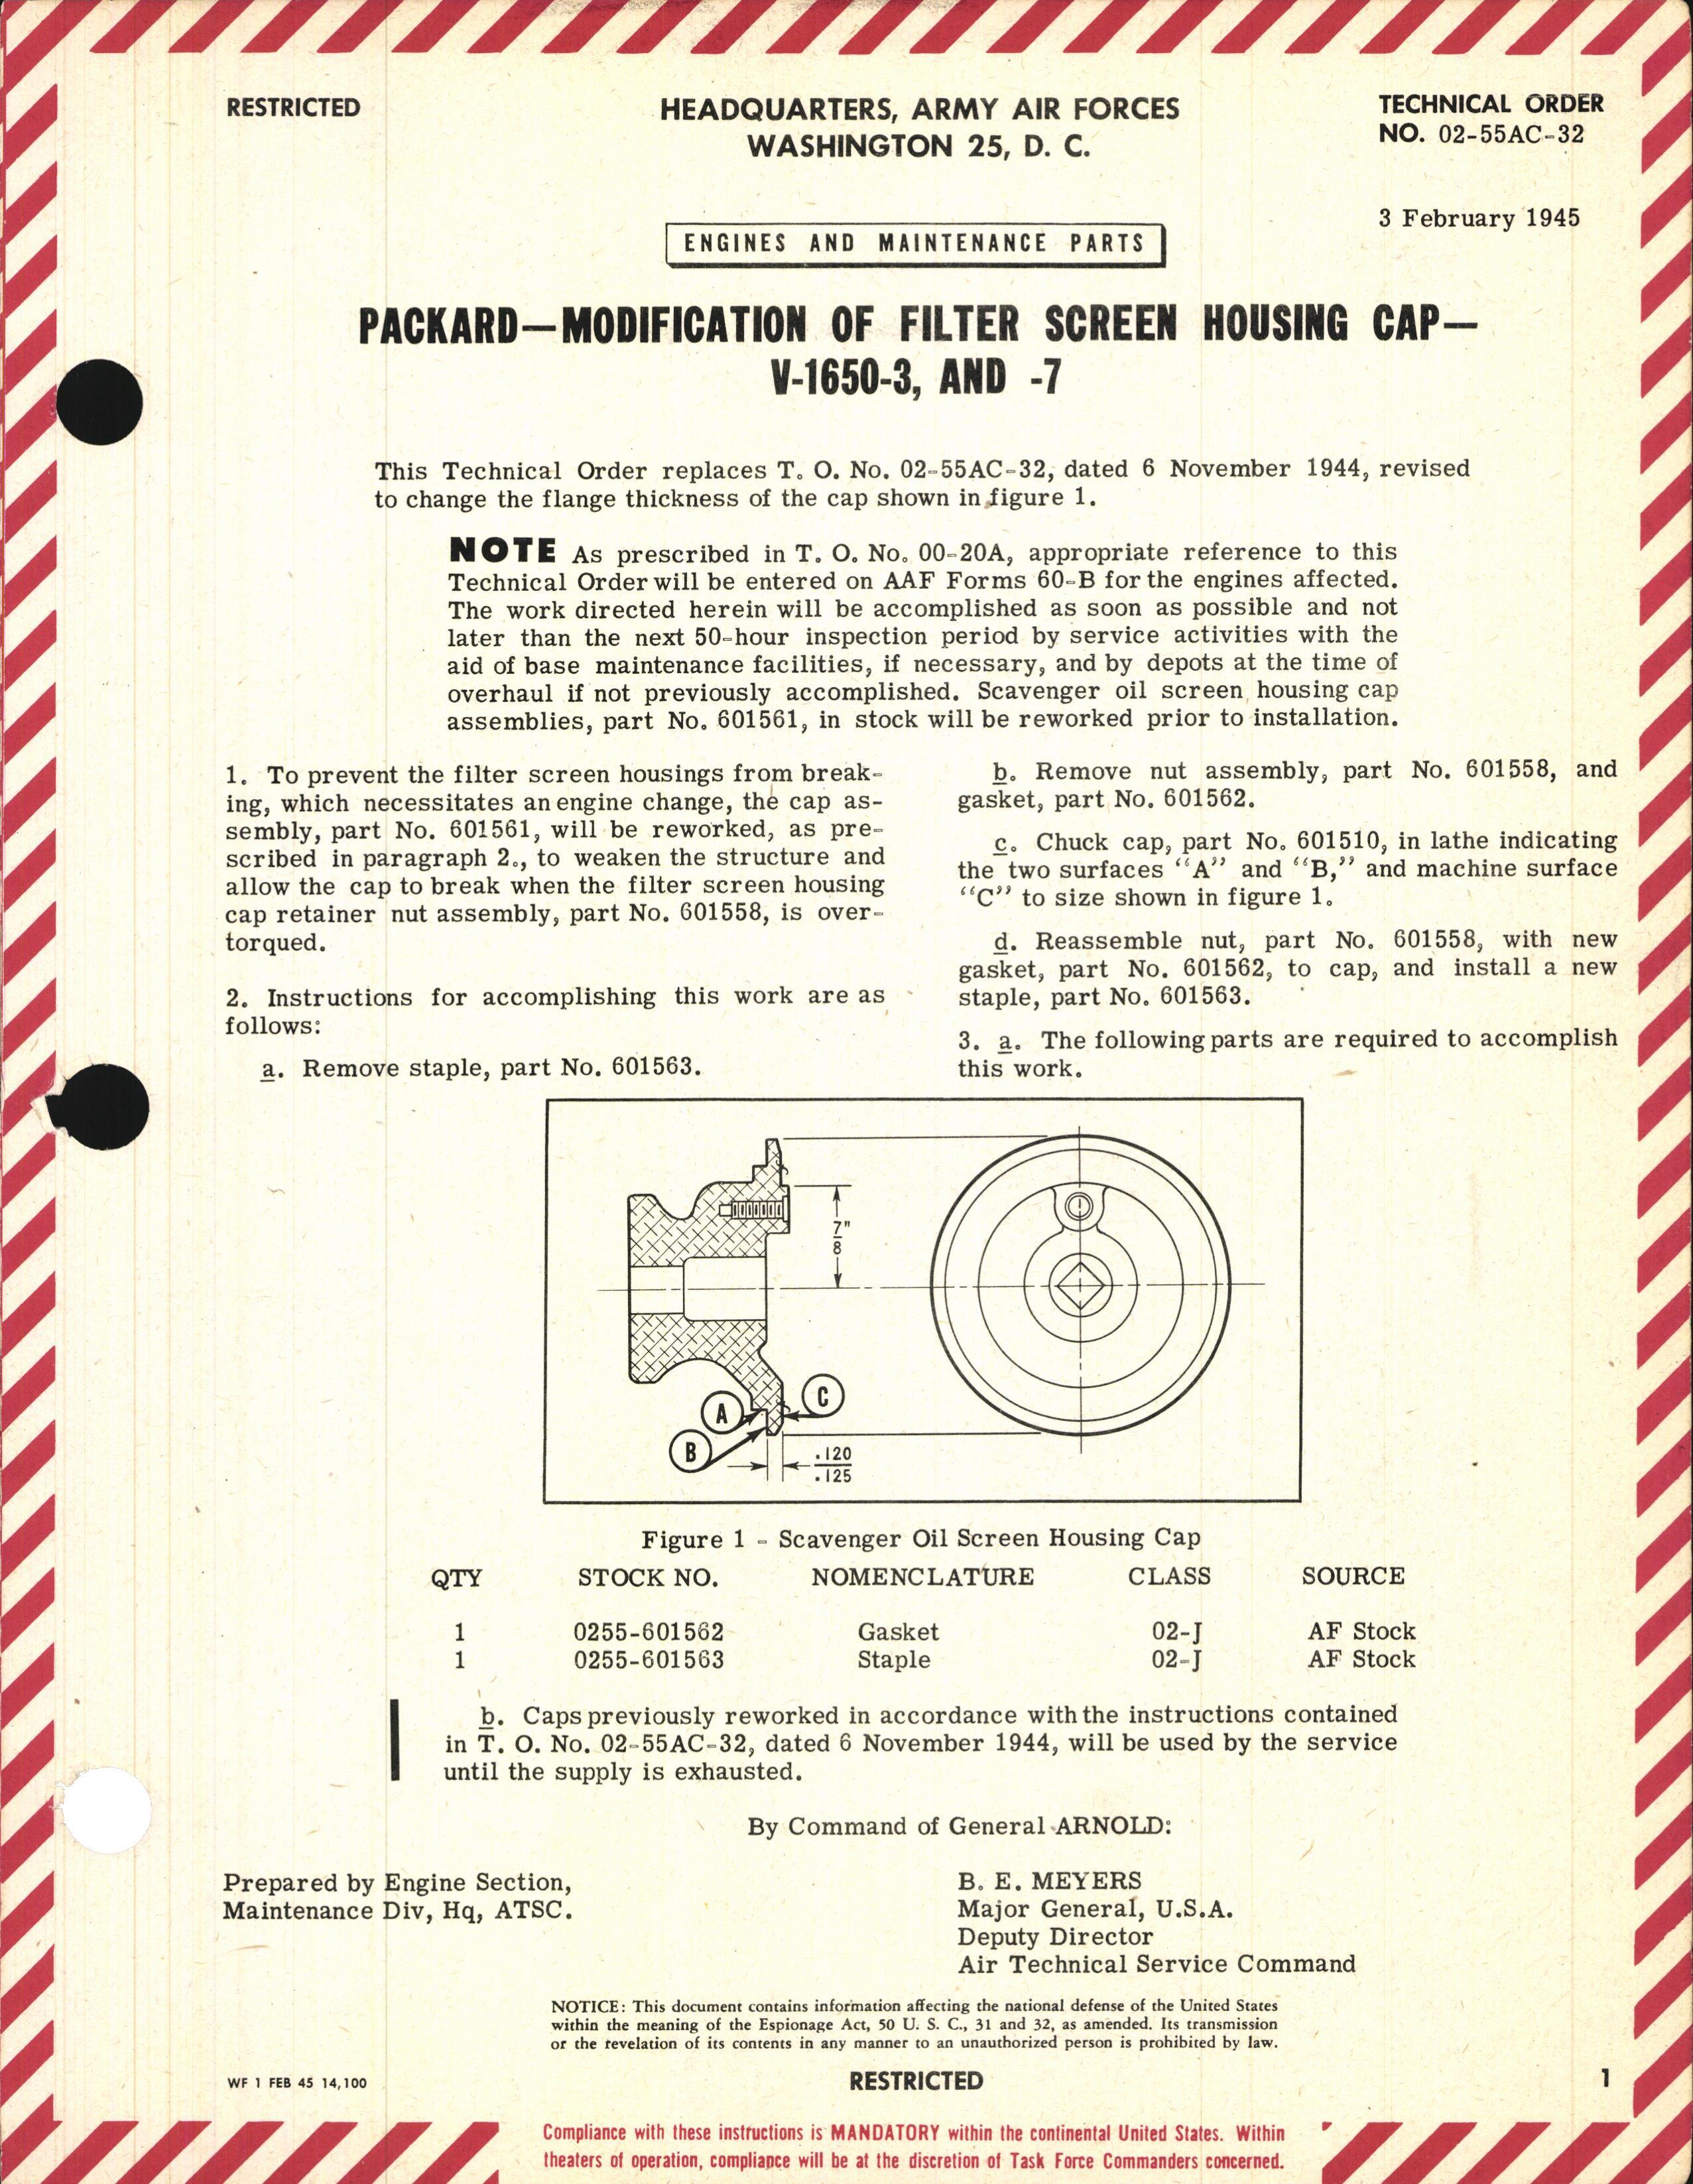 Sample page 1 from AirCorps Library document: Modification of Filter Screen Housing Cap for V-1650-3 and -7